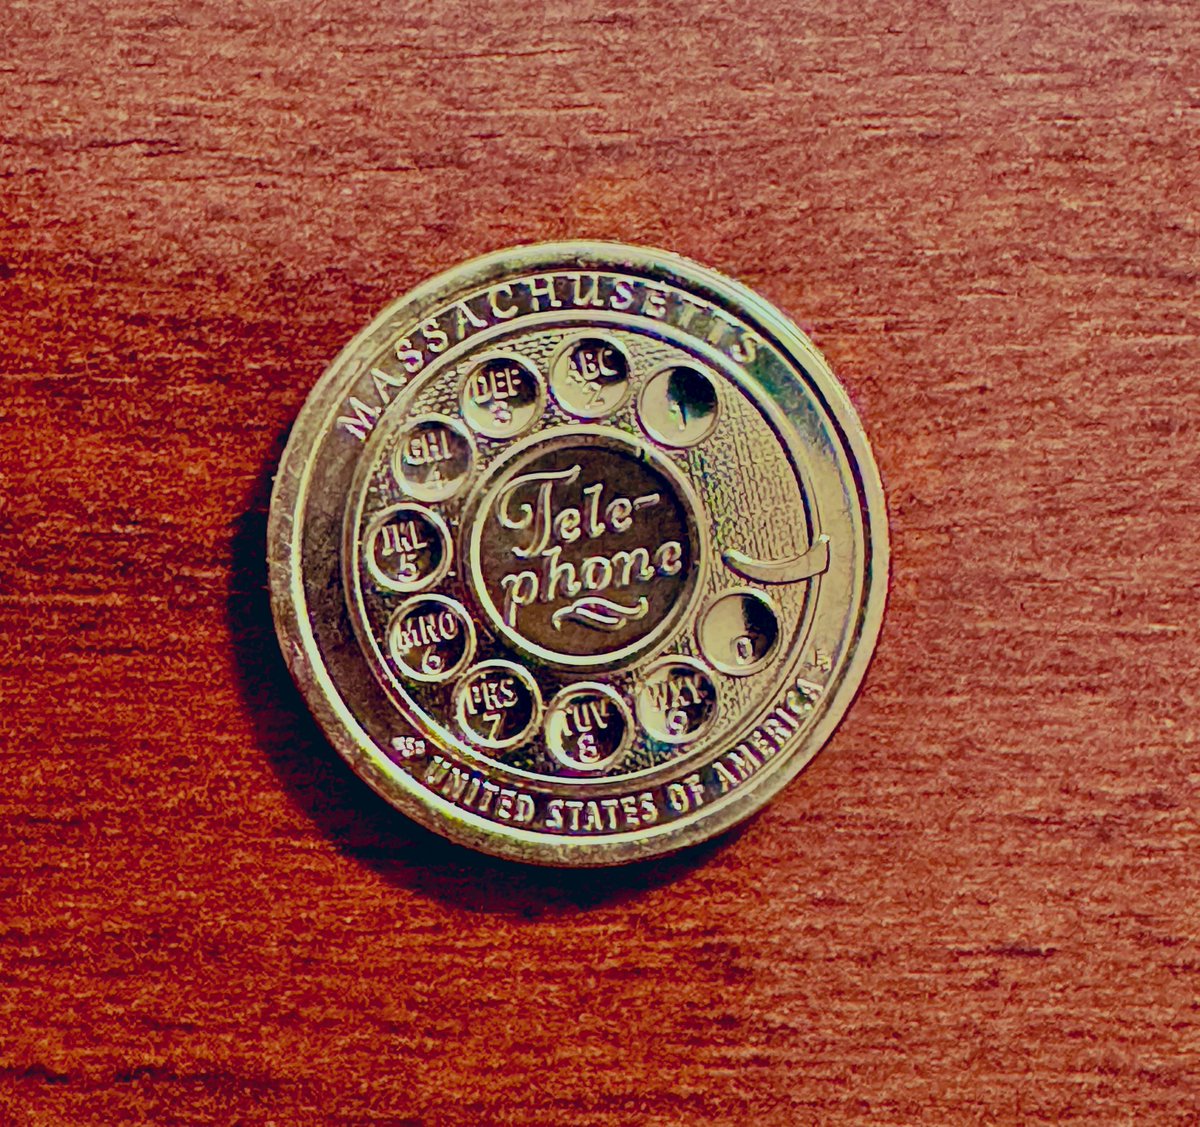 Celebrating Alexander Graham Bell's first telephone call in #Boston. This token is a testament to that groundbreaking moment that forever changed communication. 📞✨ #TechHistory #AvayaEngage